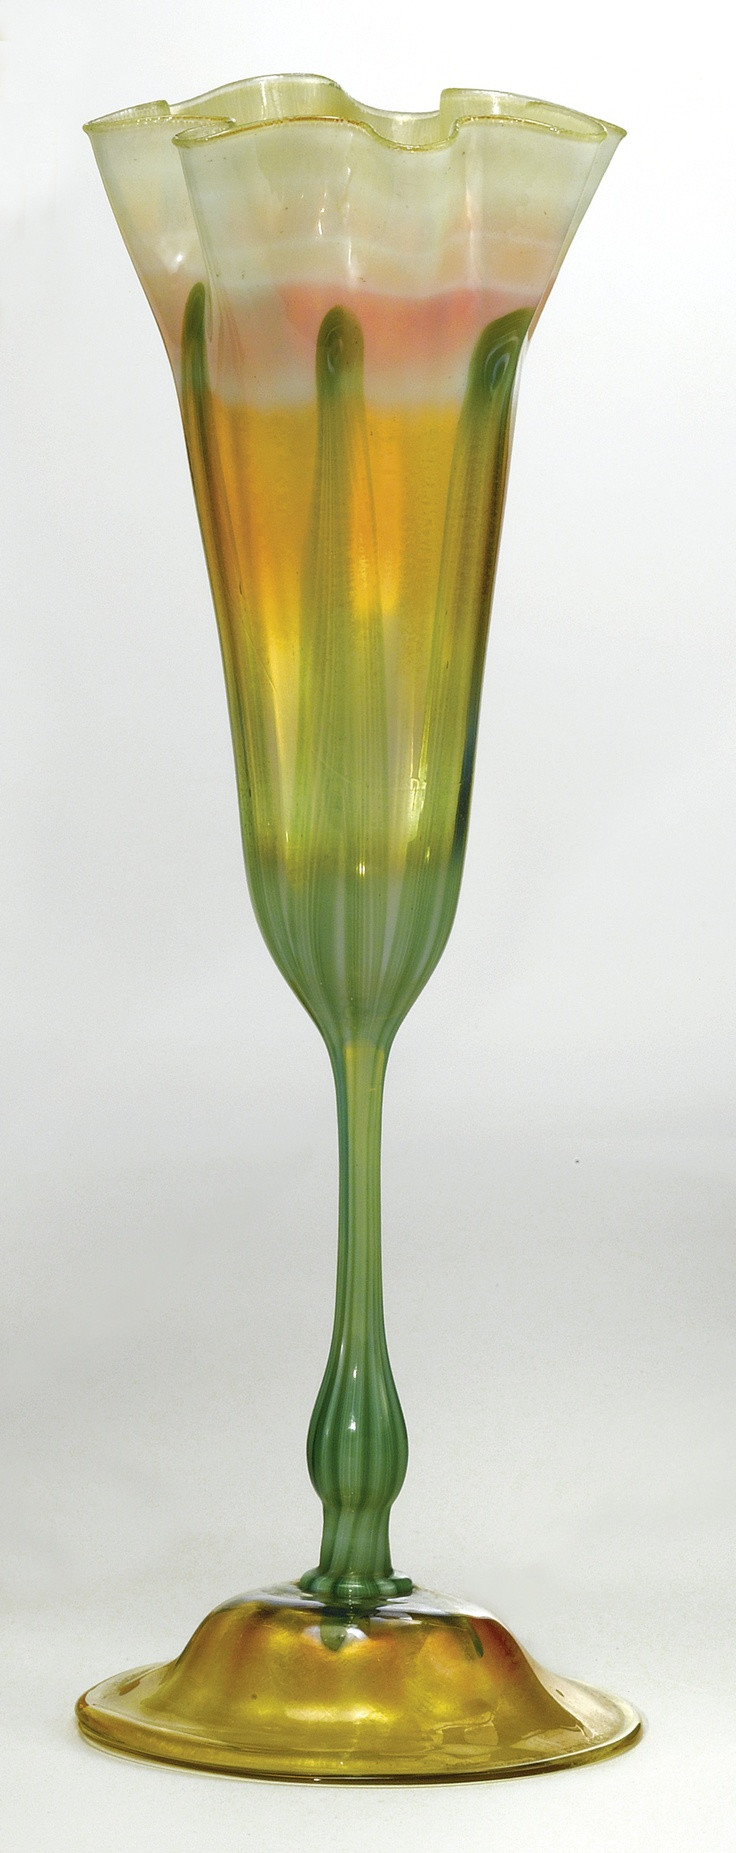 24 Recommended Extra Large Brandy Glass Vase 2024 free download extra large brandy glass vase of 300 best art glass images on pinterest crystals art nouveau and intended for tiffany studios new york iridescent favrile glass floriform vase